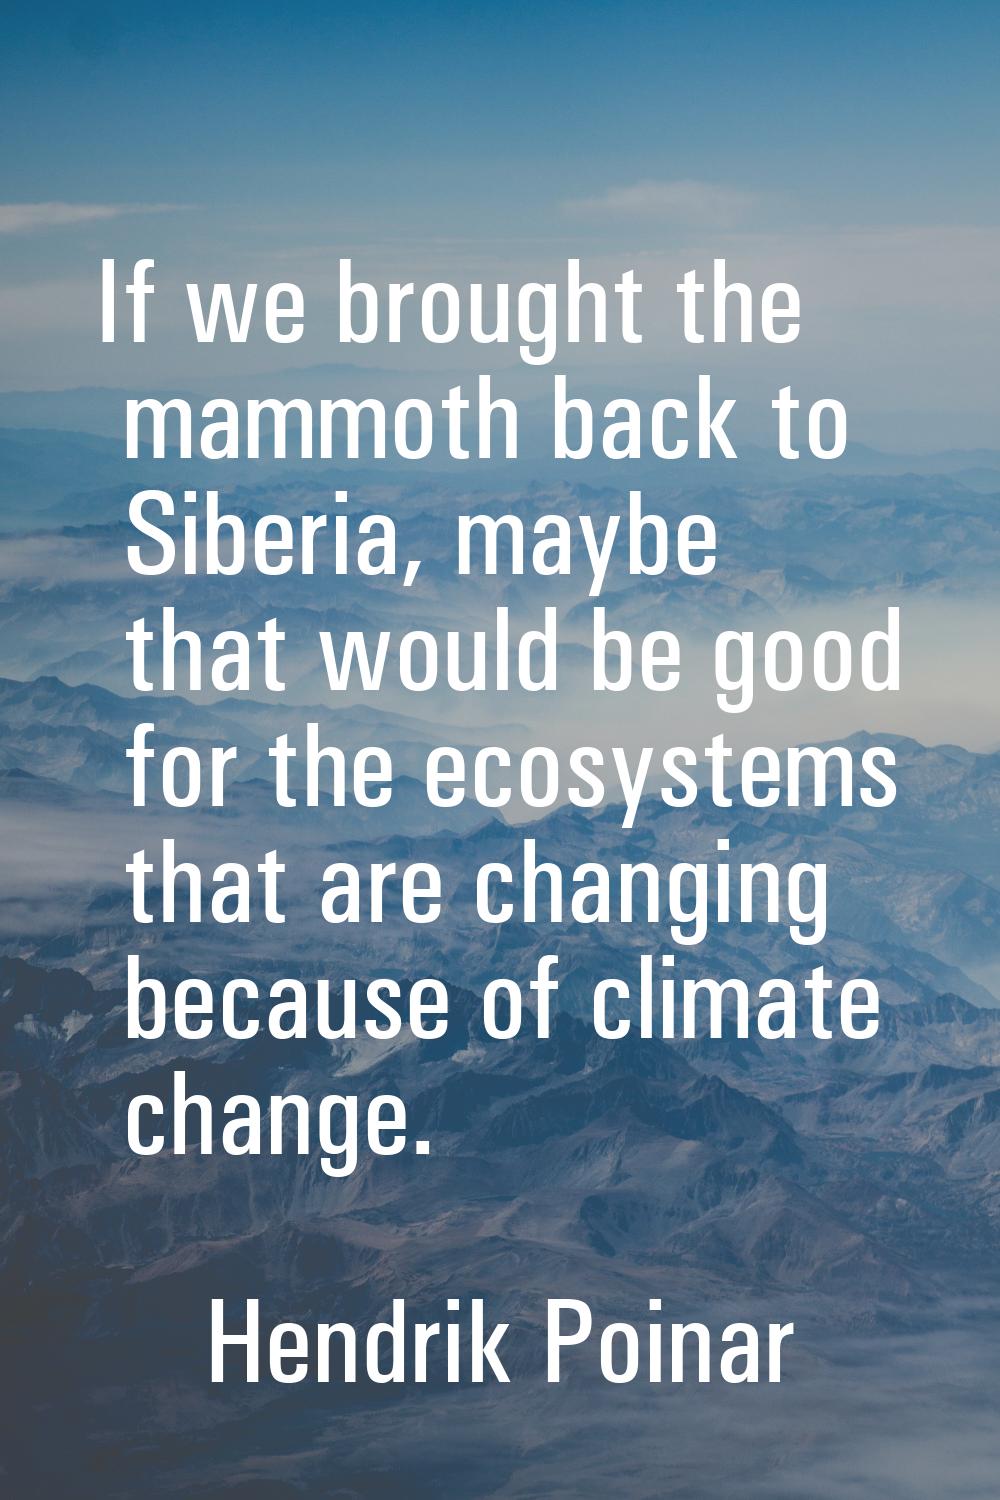 If we brought the mammoth back to Siberia, maybe that would be good for the ecosystems that are cha